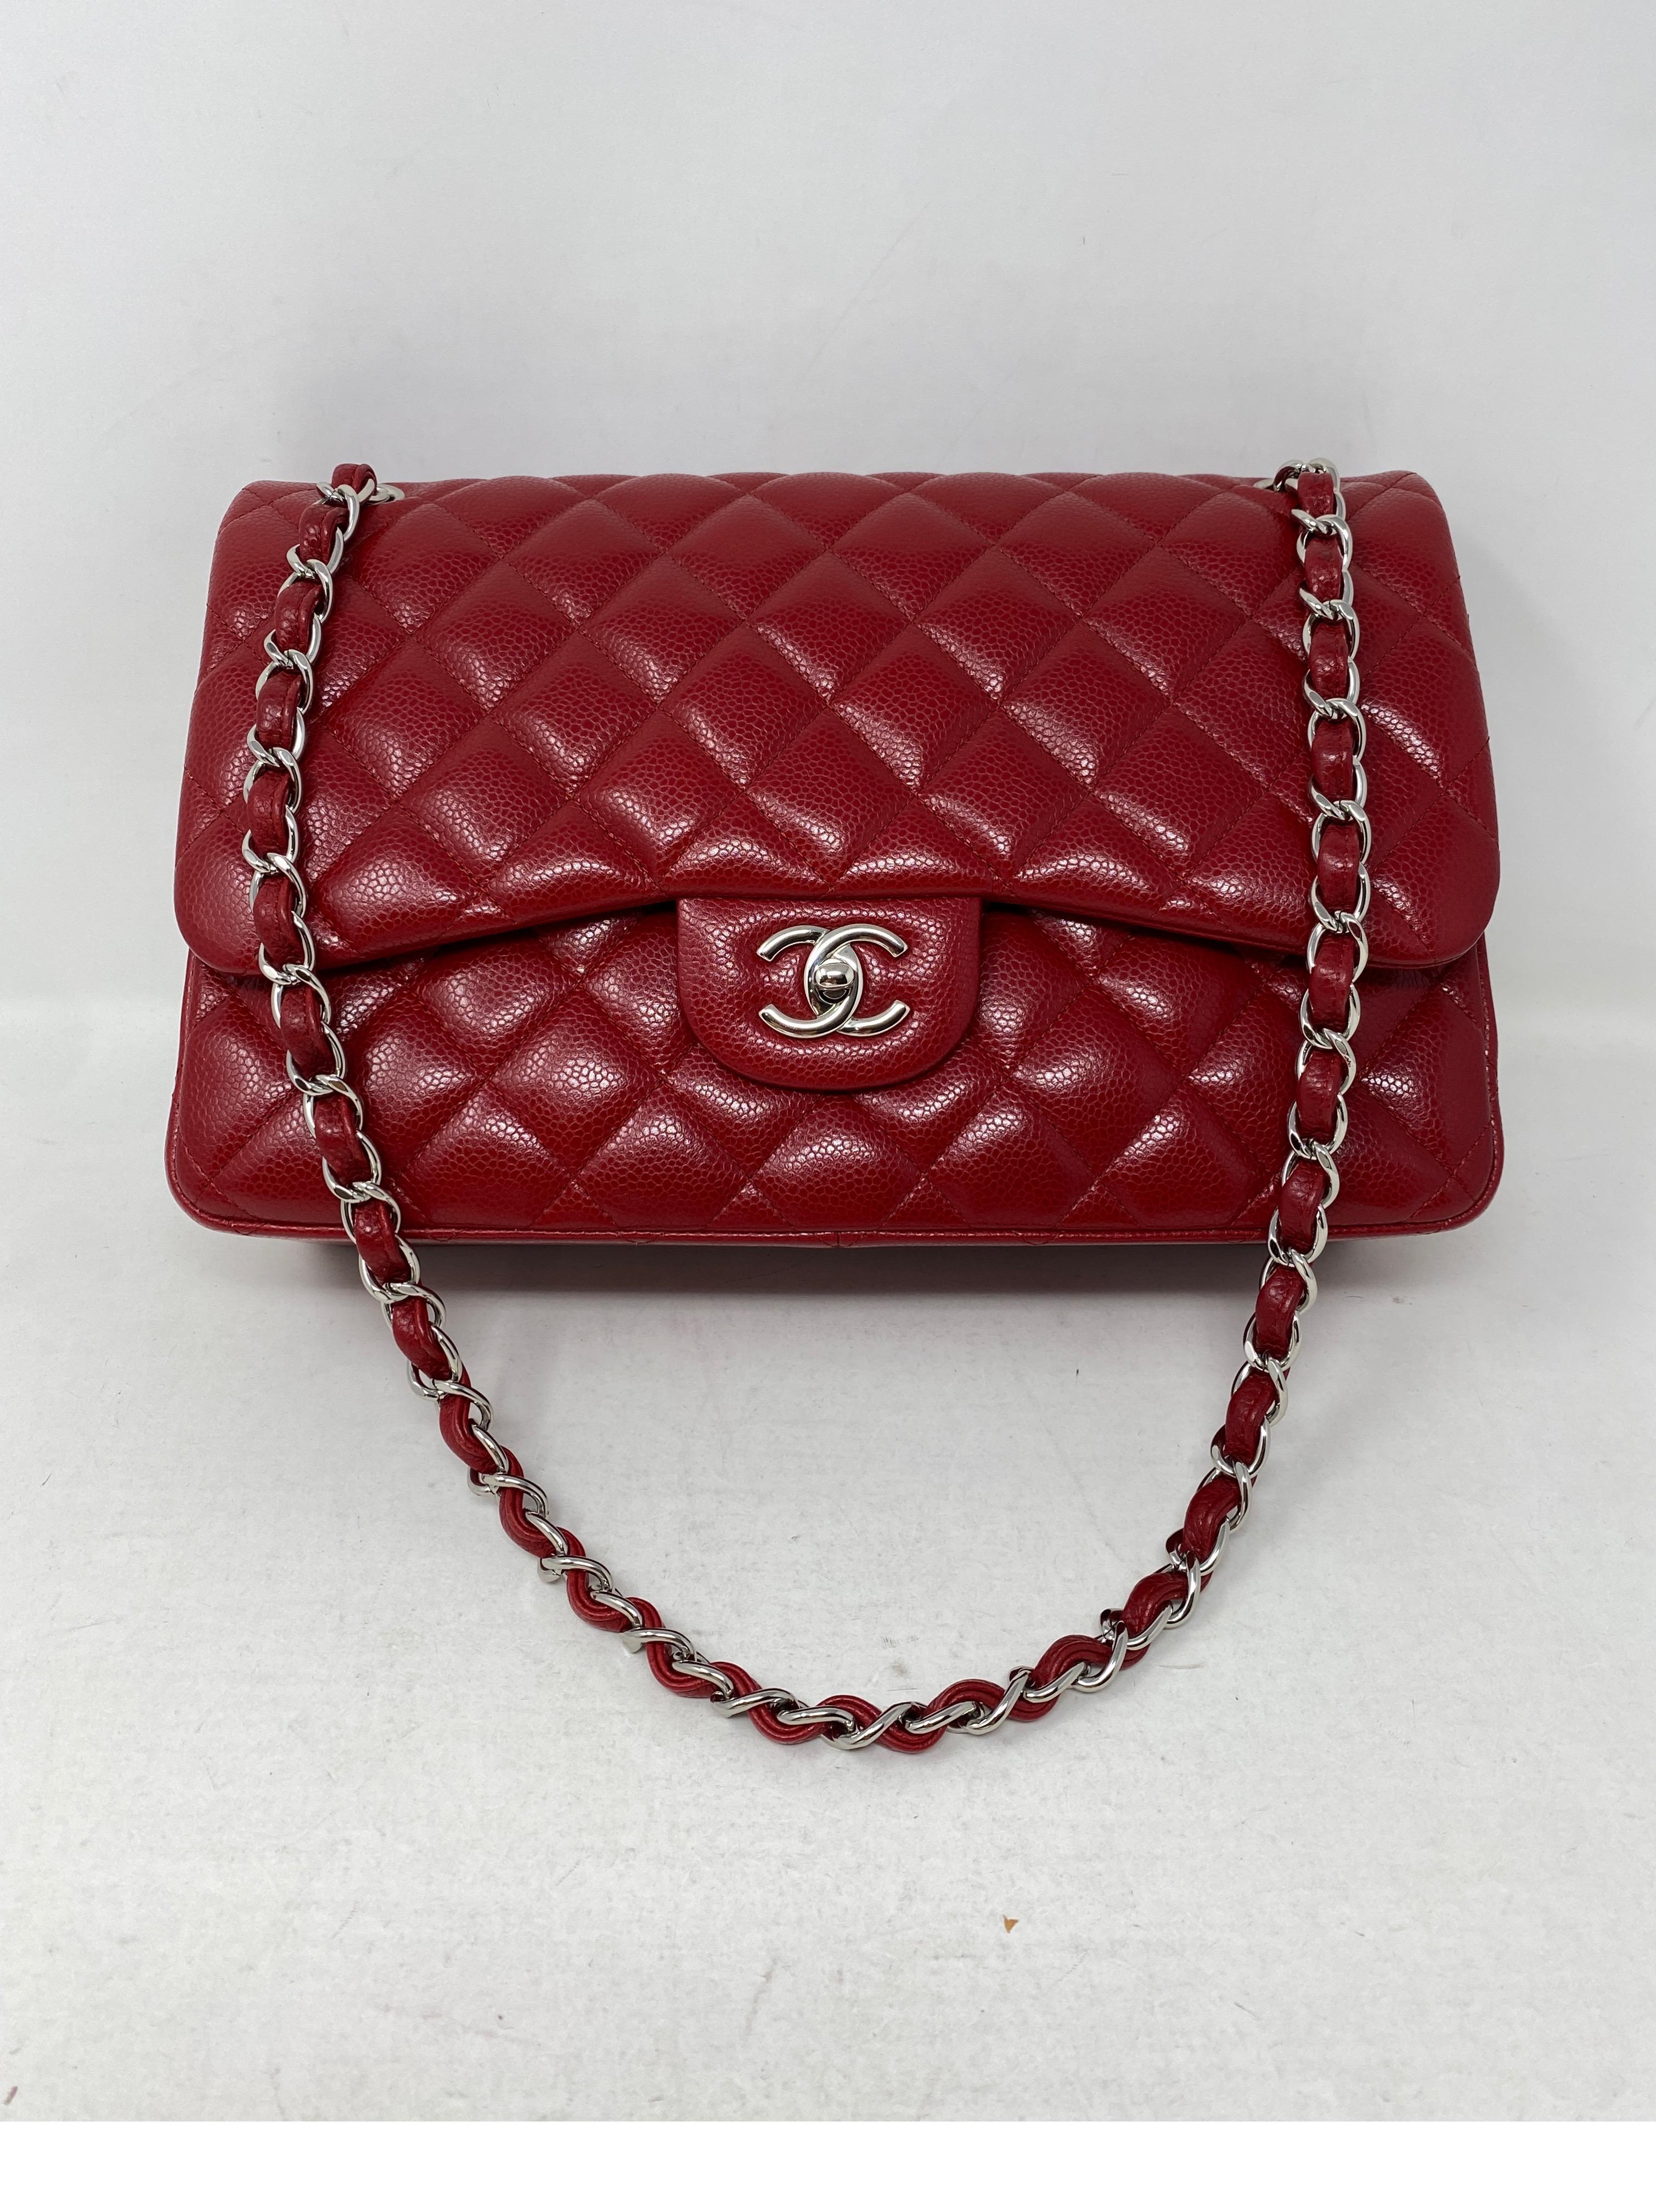 Chanel Red Jumbo Double Flap Bag. Caviar leather with silver hardware. Excellent condition. Beautiful cherry red color. Hard to find combo. Classic Chanels are going up. Serial number is inside bag. Guaranteed authentic. 